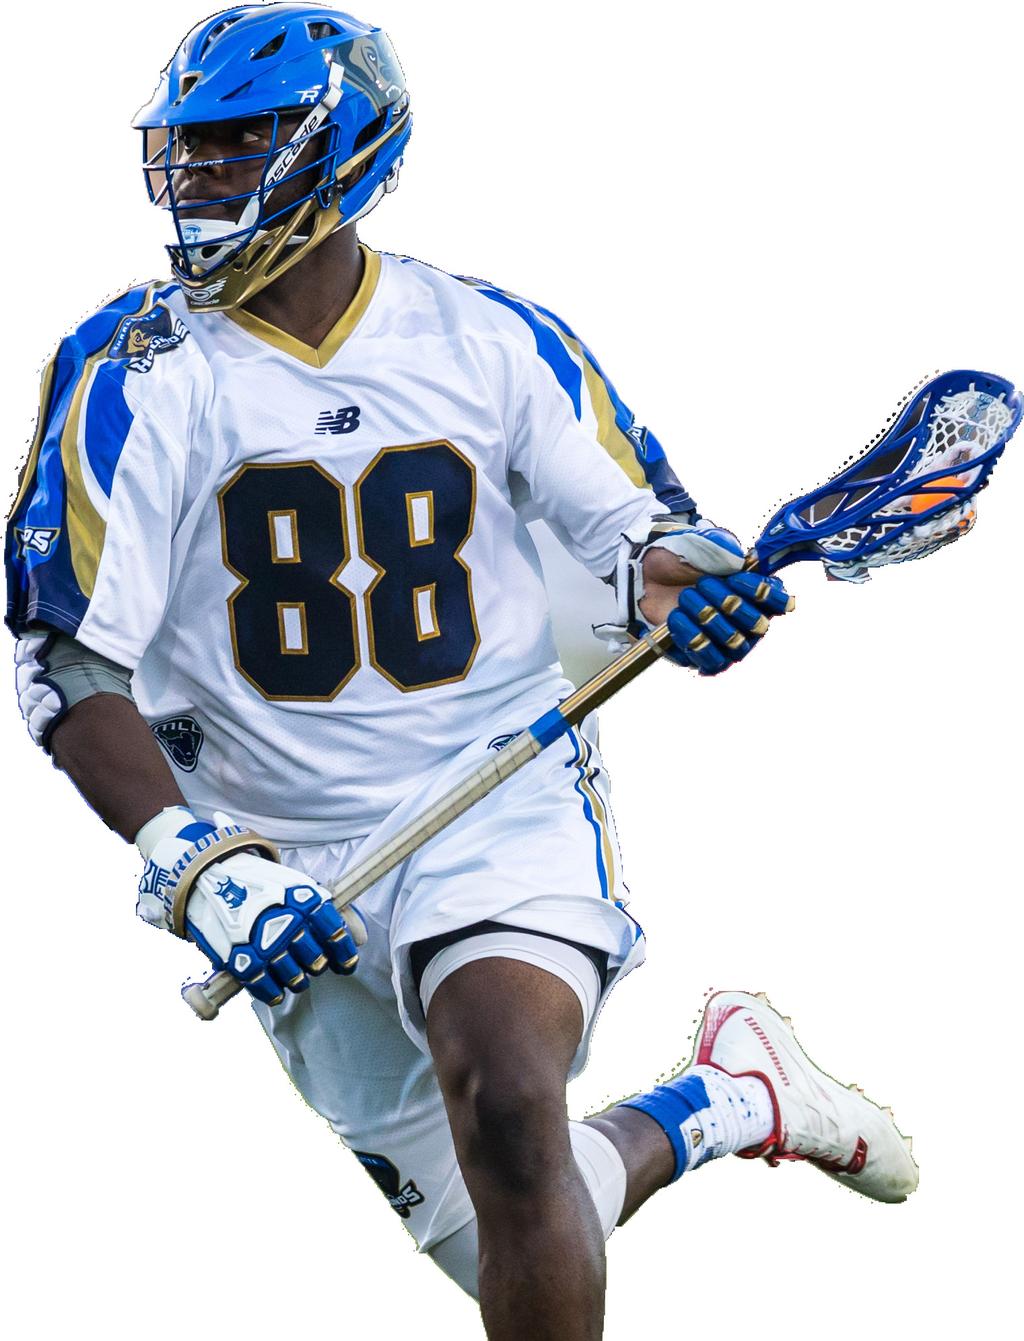 PAT YOUNG MIDFIELD #88 6 1 205 LBS BORN 10/5/93 HOW ACQUIRED: ADDED FROM WAIVERS, AUGUST 2017 PAT AT A GLANCE 2017 MLL SEASON: